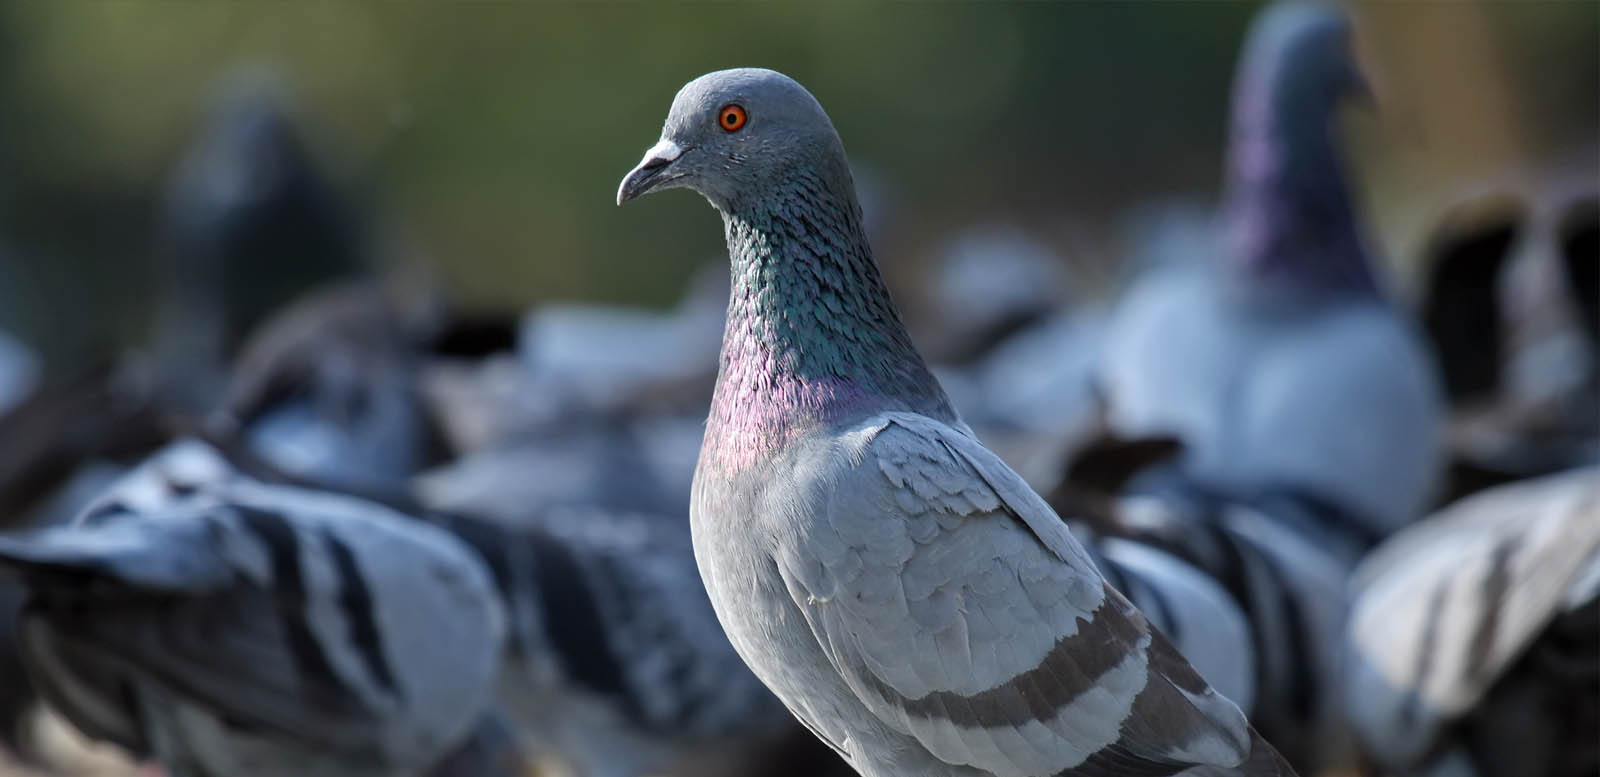 Pigeon deterrent UK services and bird deterrents for roofs 